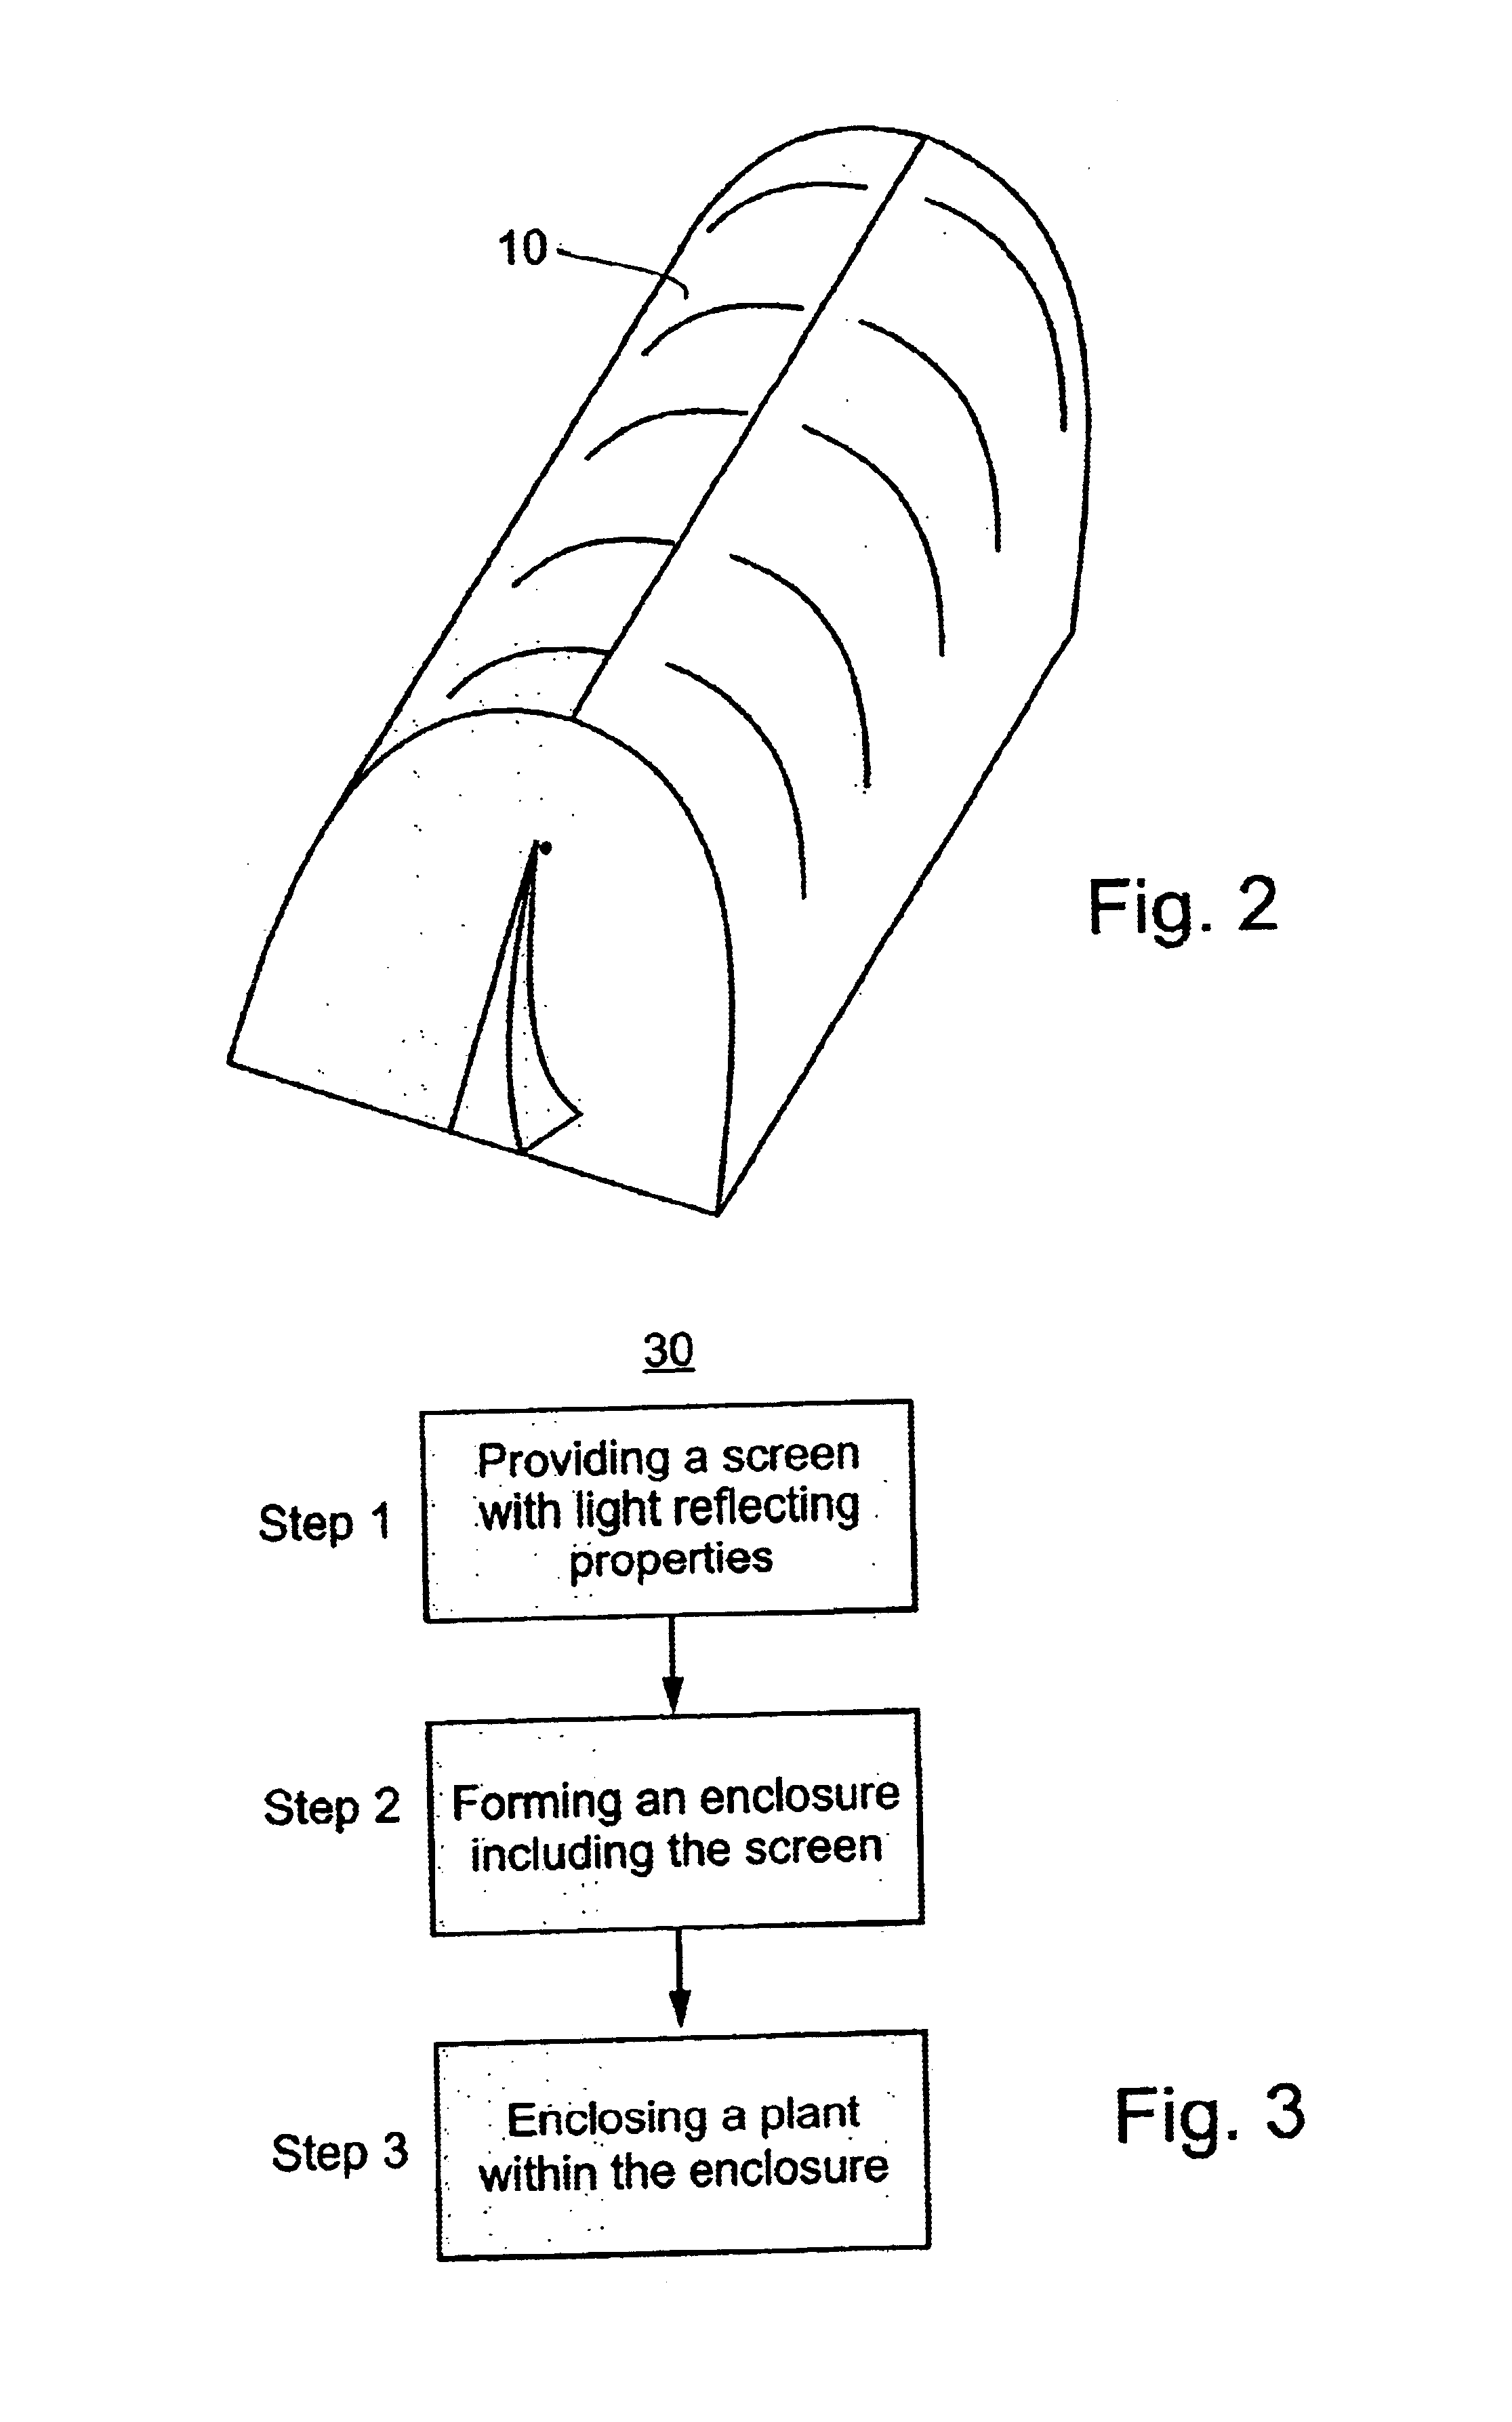 Barrier, enclosure and method for protecting crops including a light reflecting screen